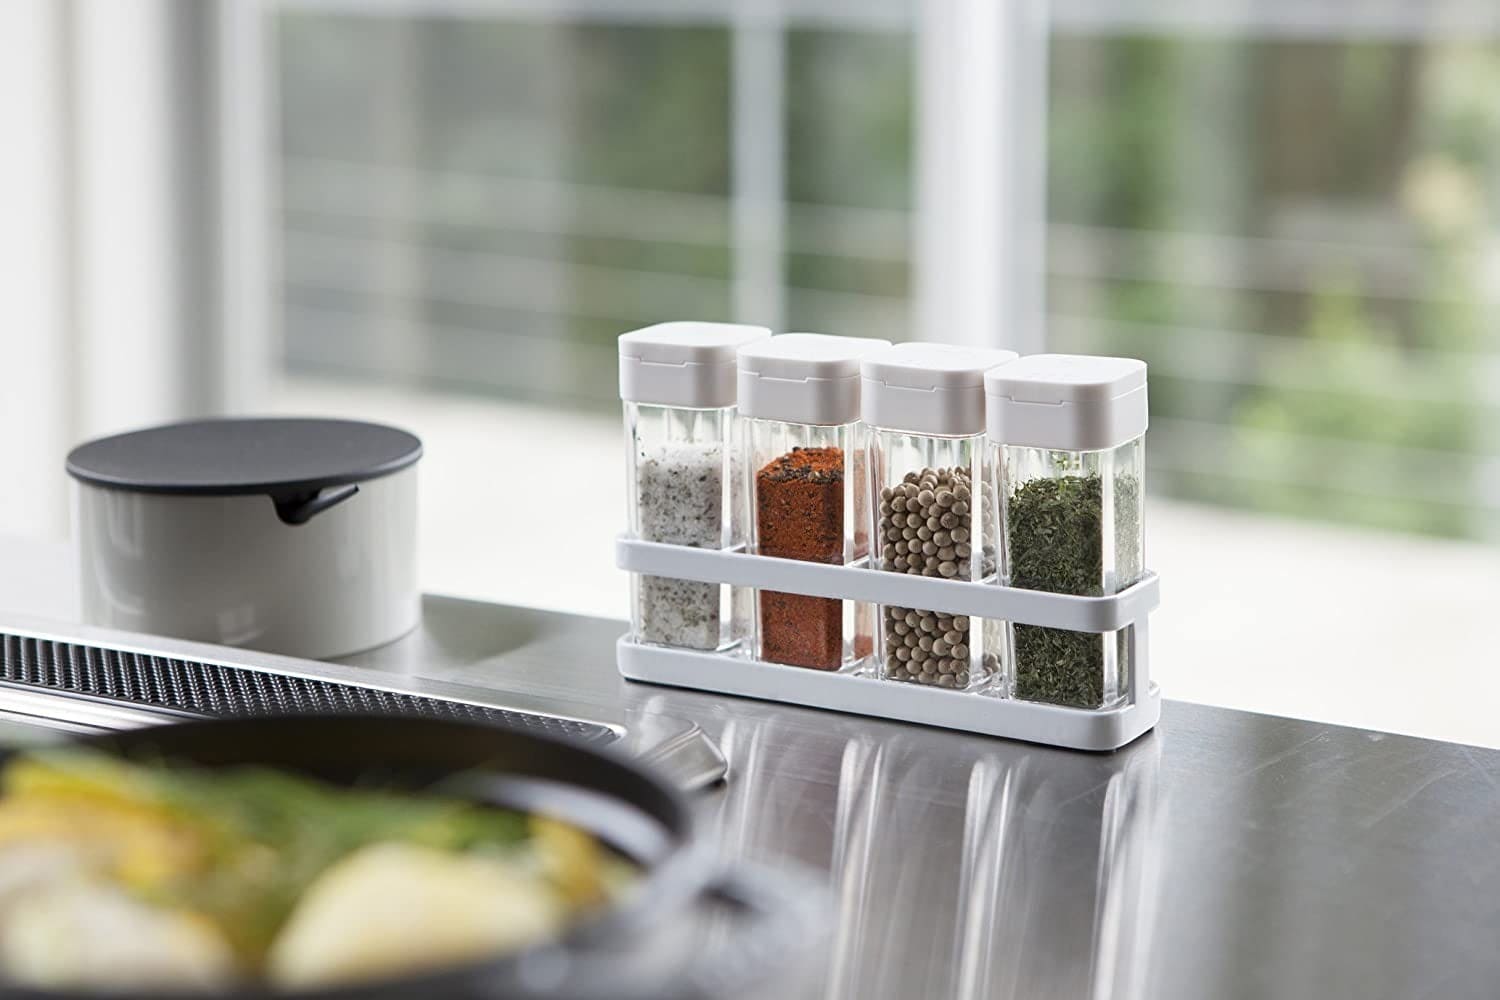 4 Pcs Spice Bottles With Rack, Seasoning Shaker Box, Transparent Storage Containers For Salt, Spices & Herbs